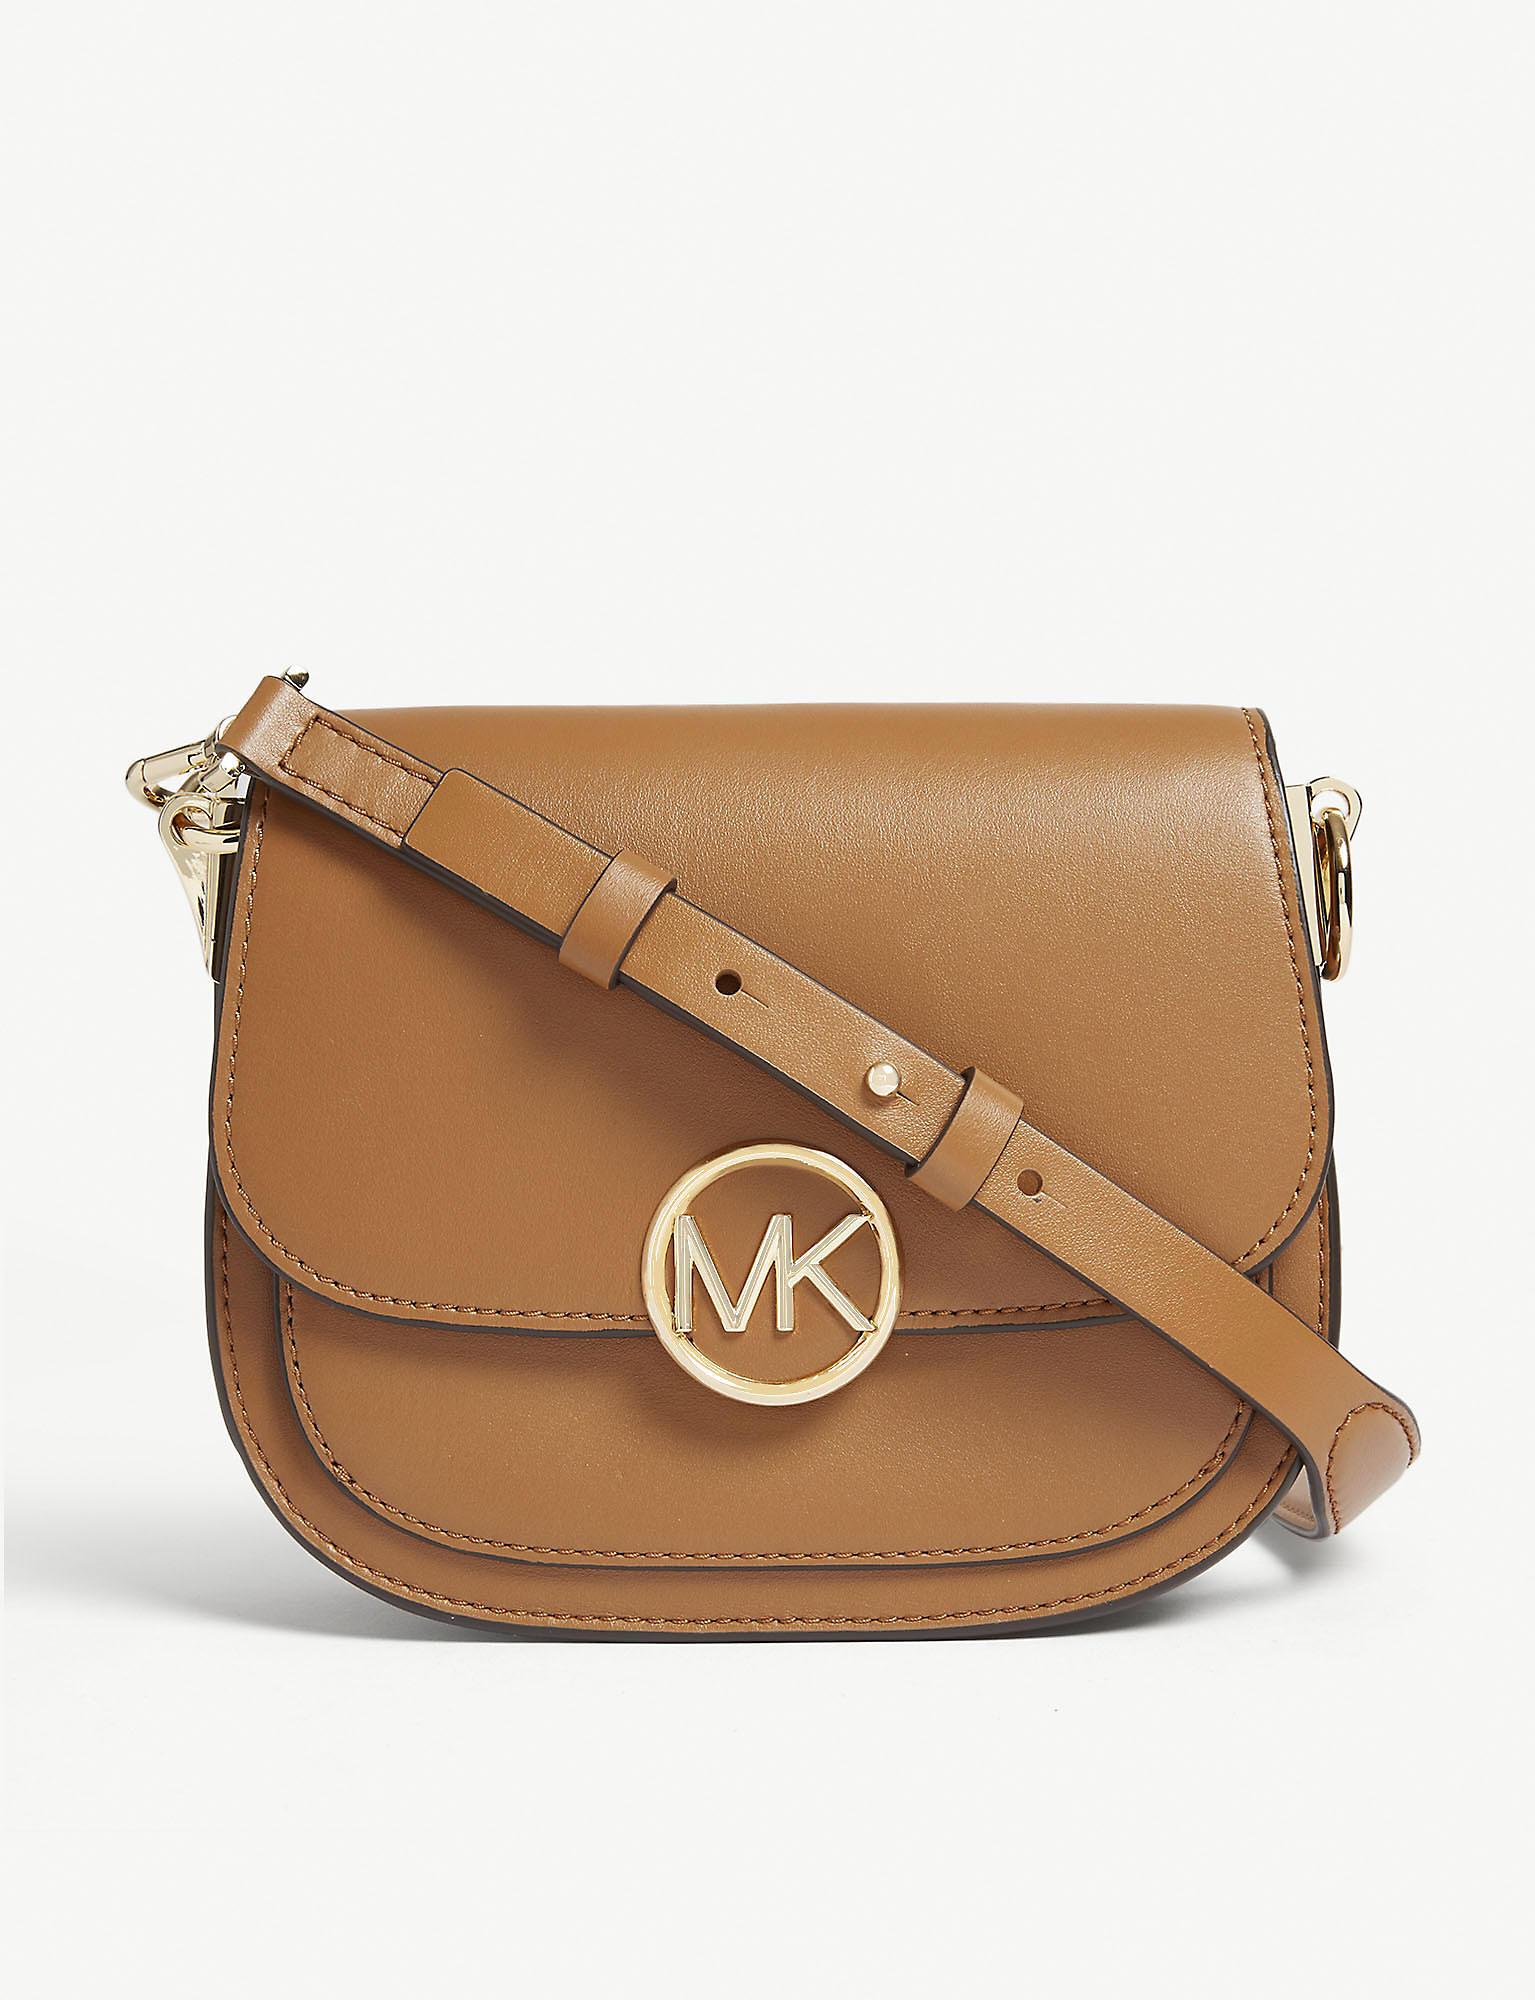 MICHAEL Michael Kors Lillie Small Leather Saddle Bag in Brown - Lyst